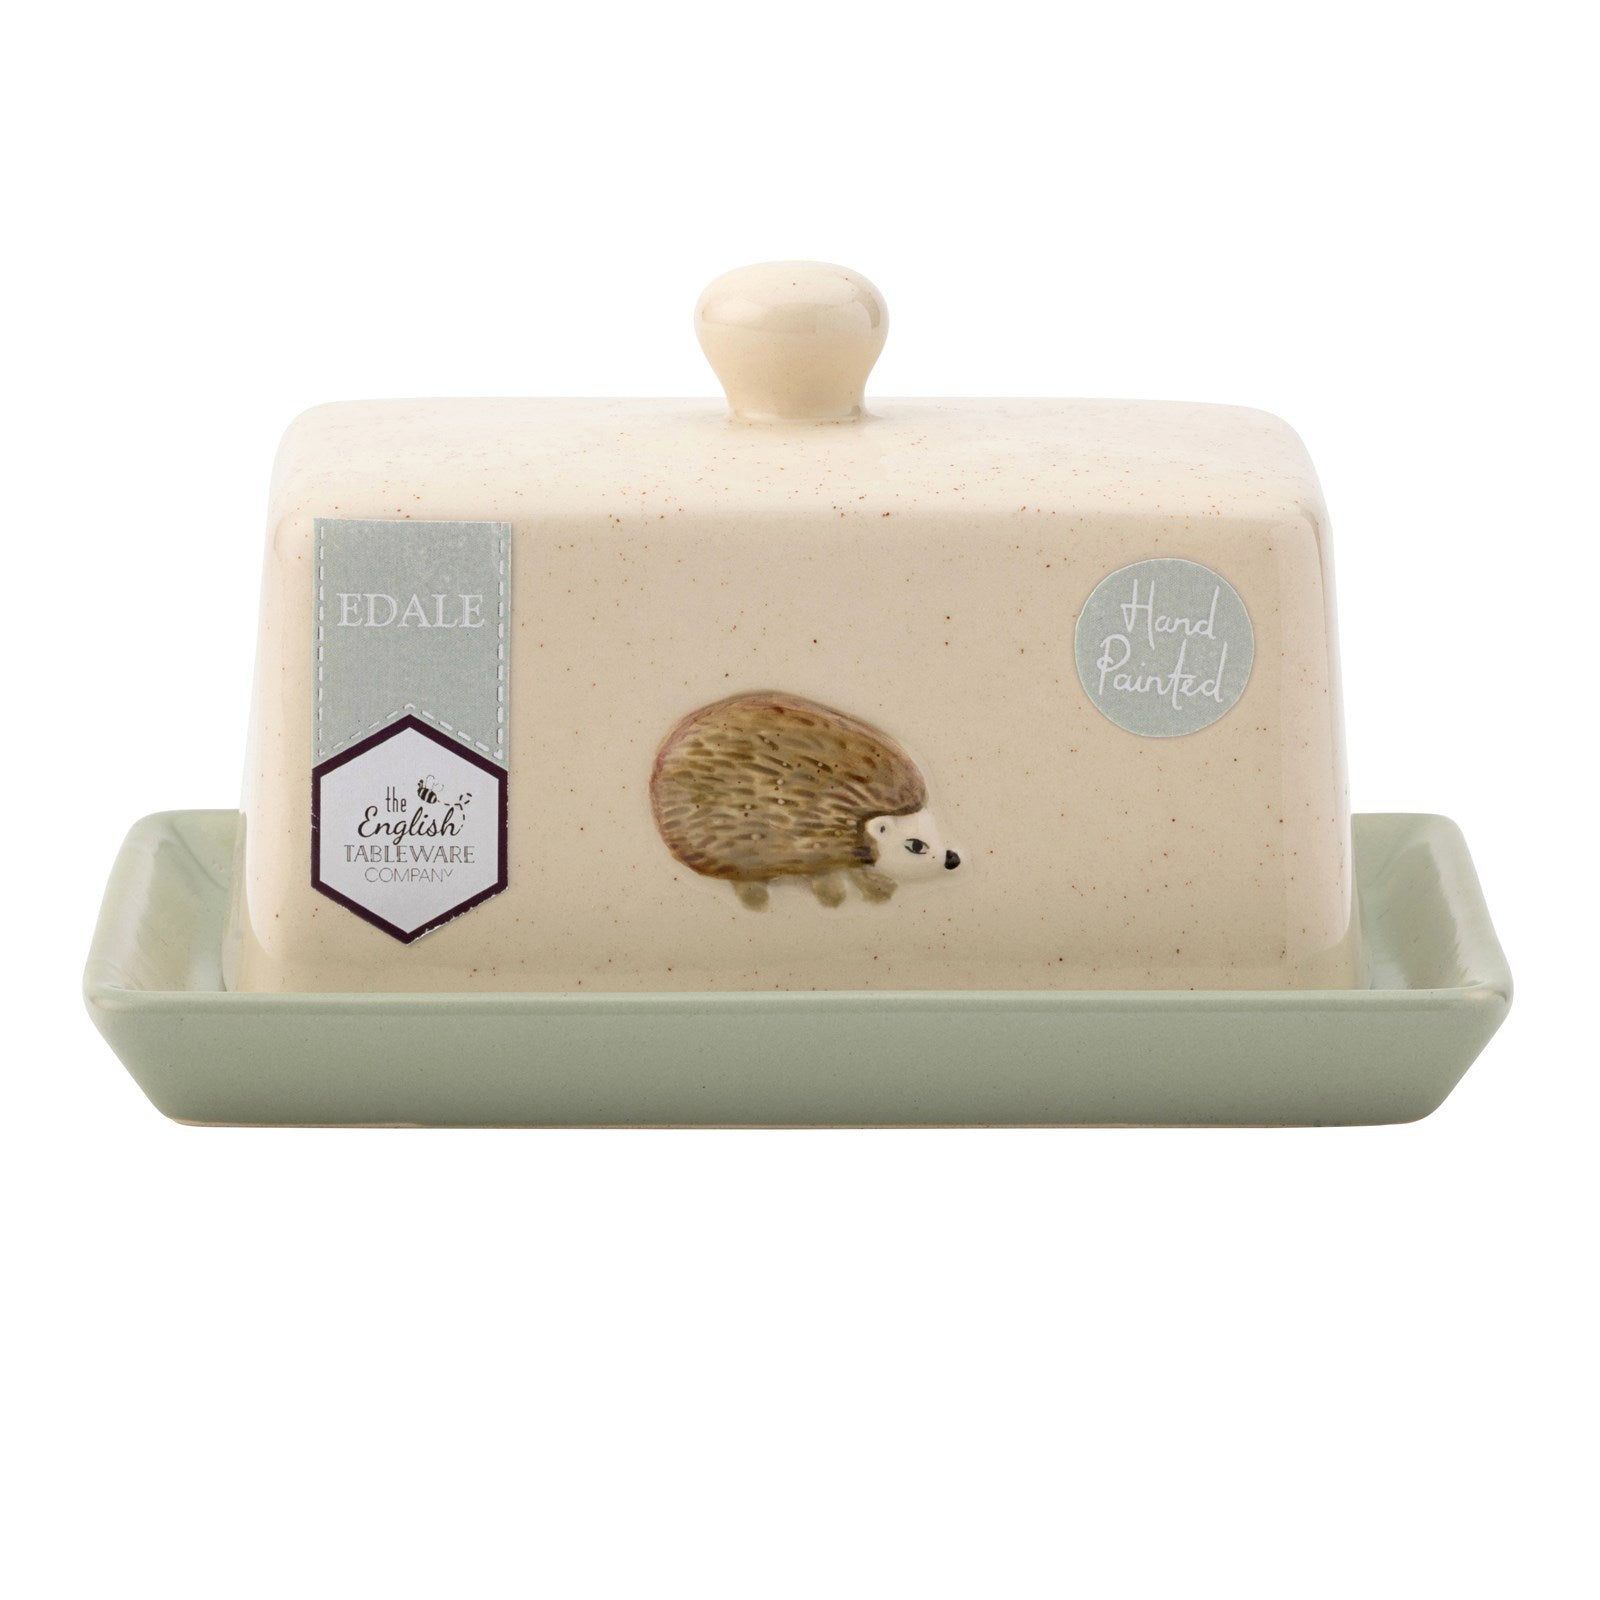 The English Tableware Company Edale Butter Dish